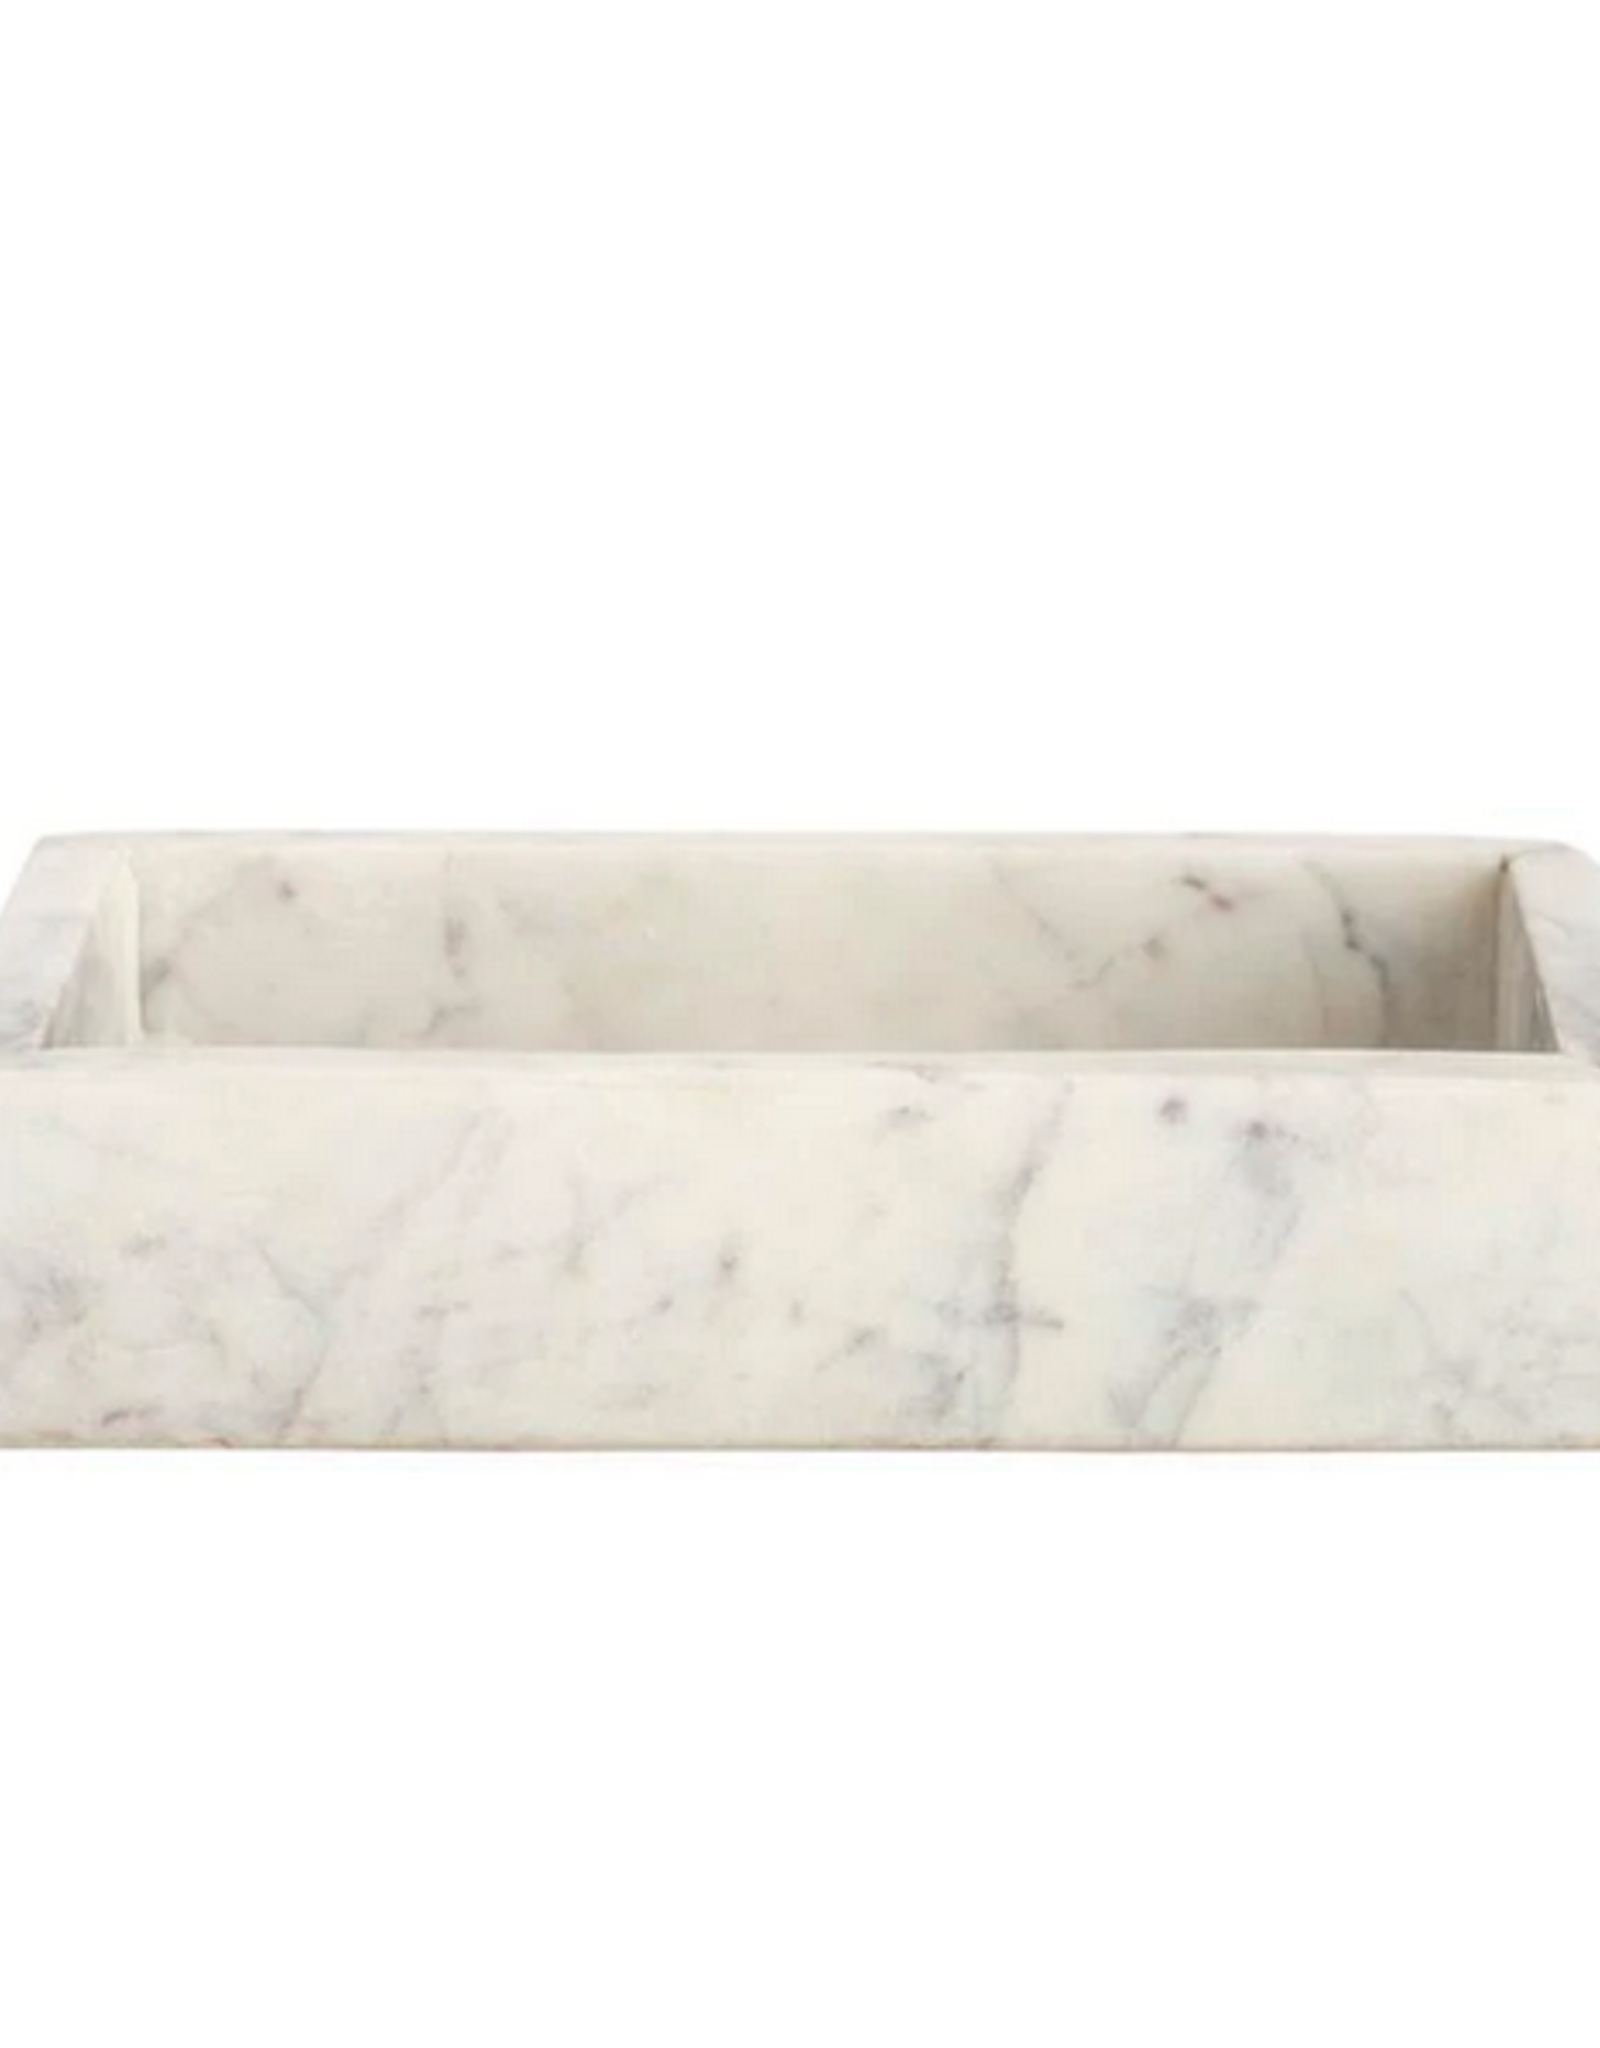 Small Marble Tray L6.75" W3.75"